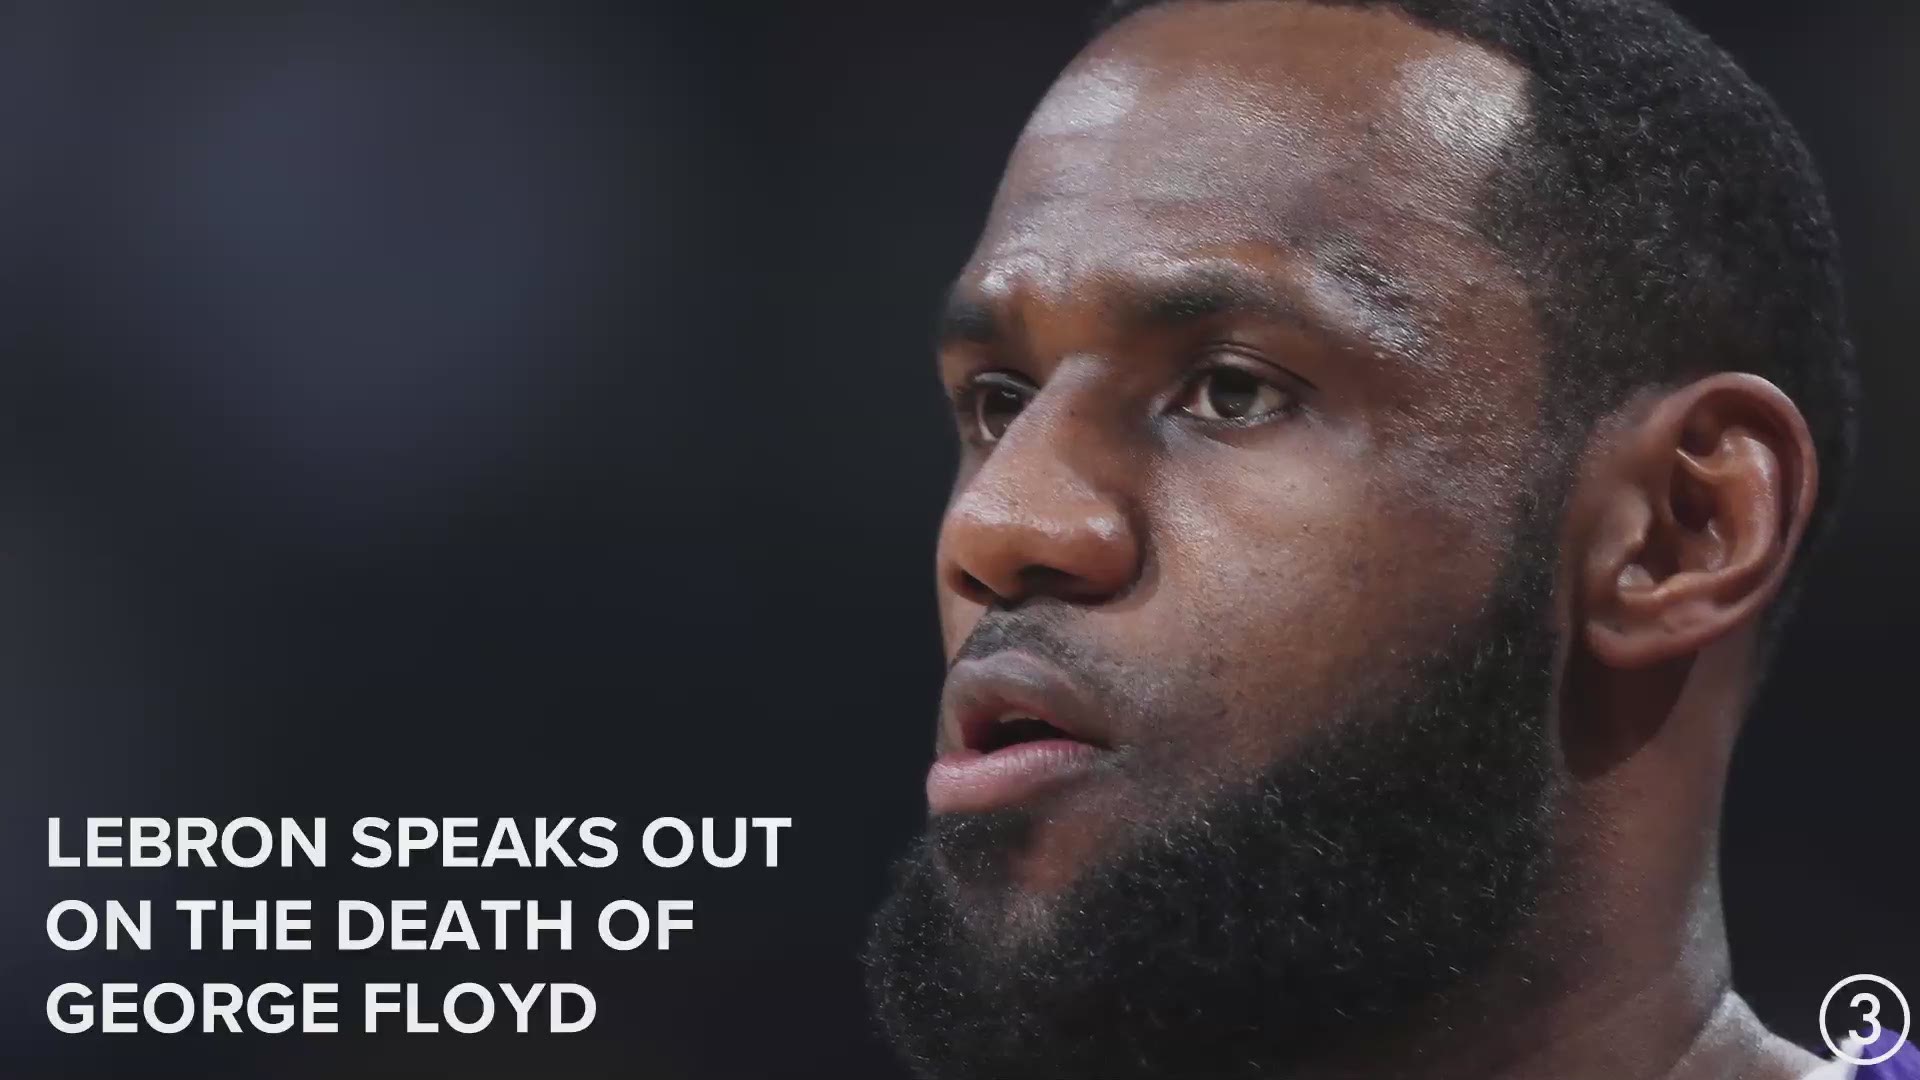 Taking to Instagram, LeBron James responded to the death of George Floyd, who died while being arrested by police officers in Minneapolis on Monday.